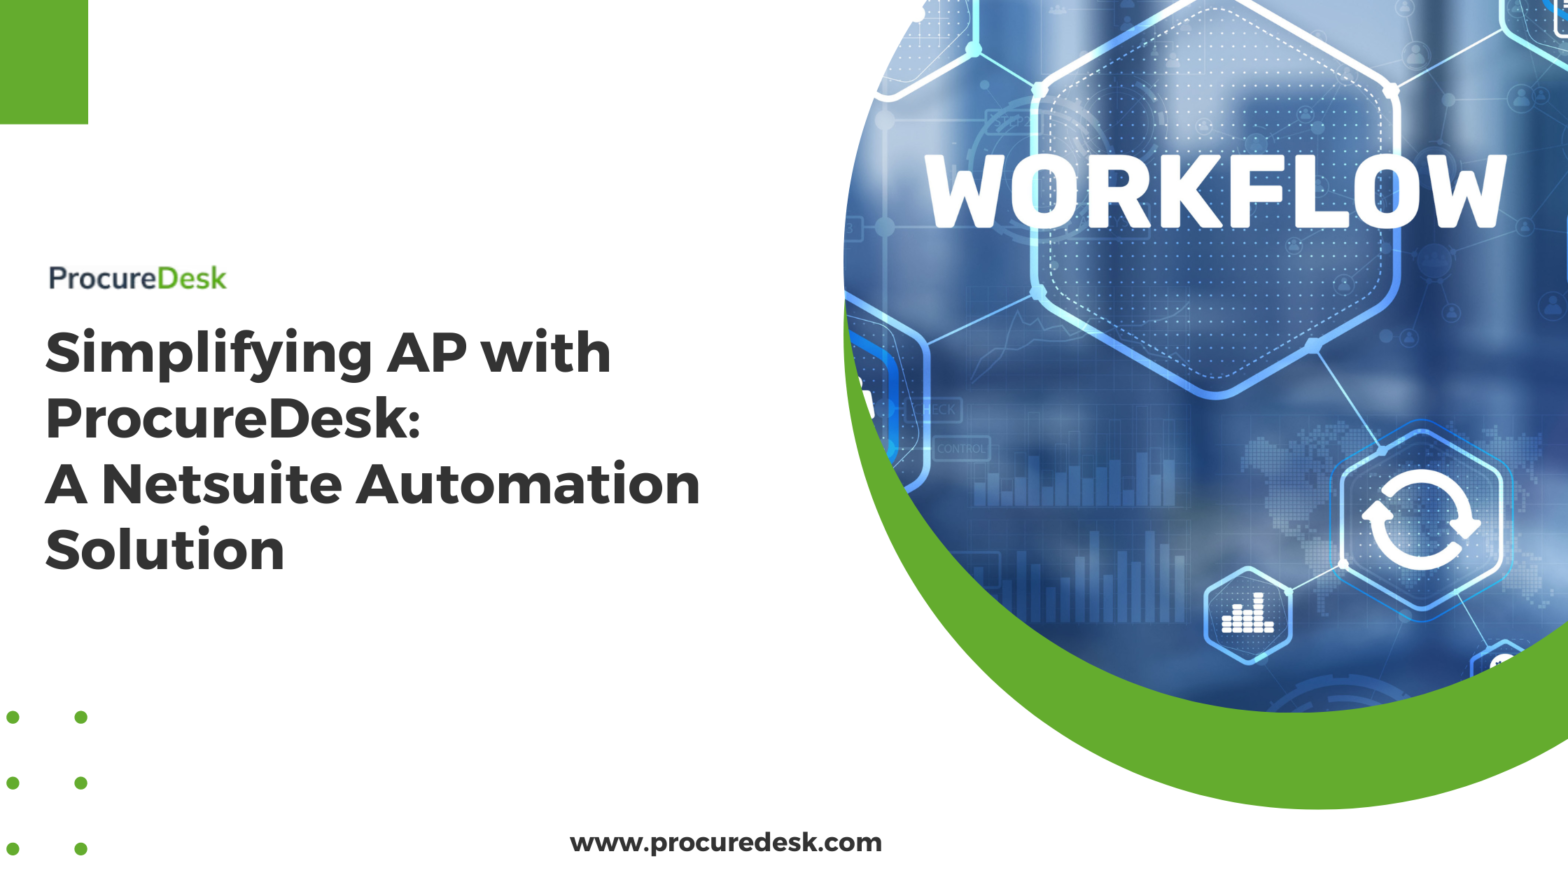 Simplifying AP with ProcureDesk A Netsuite Automation Solution